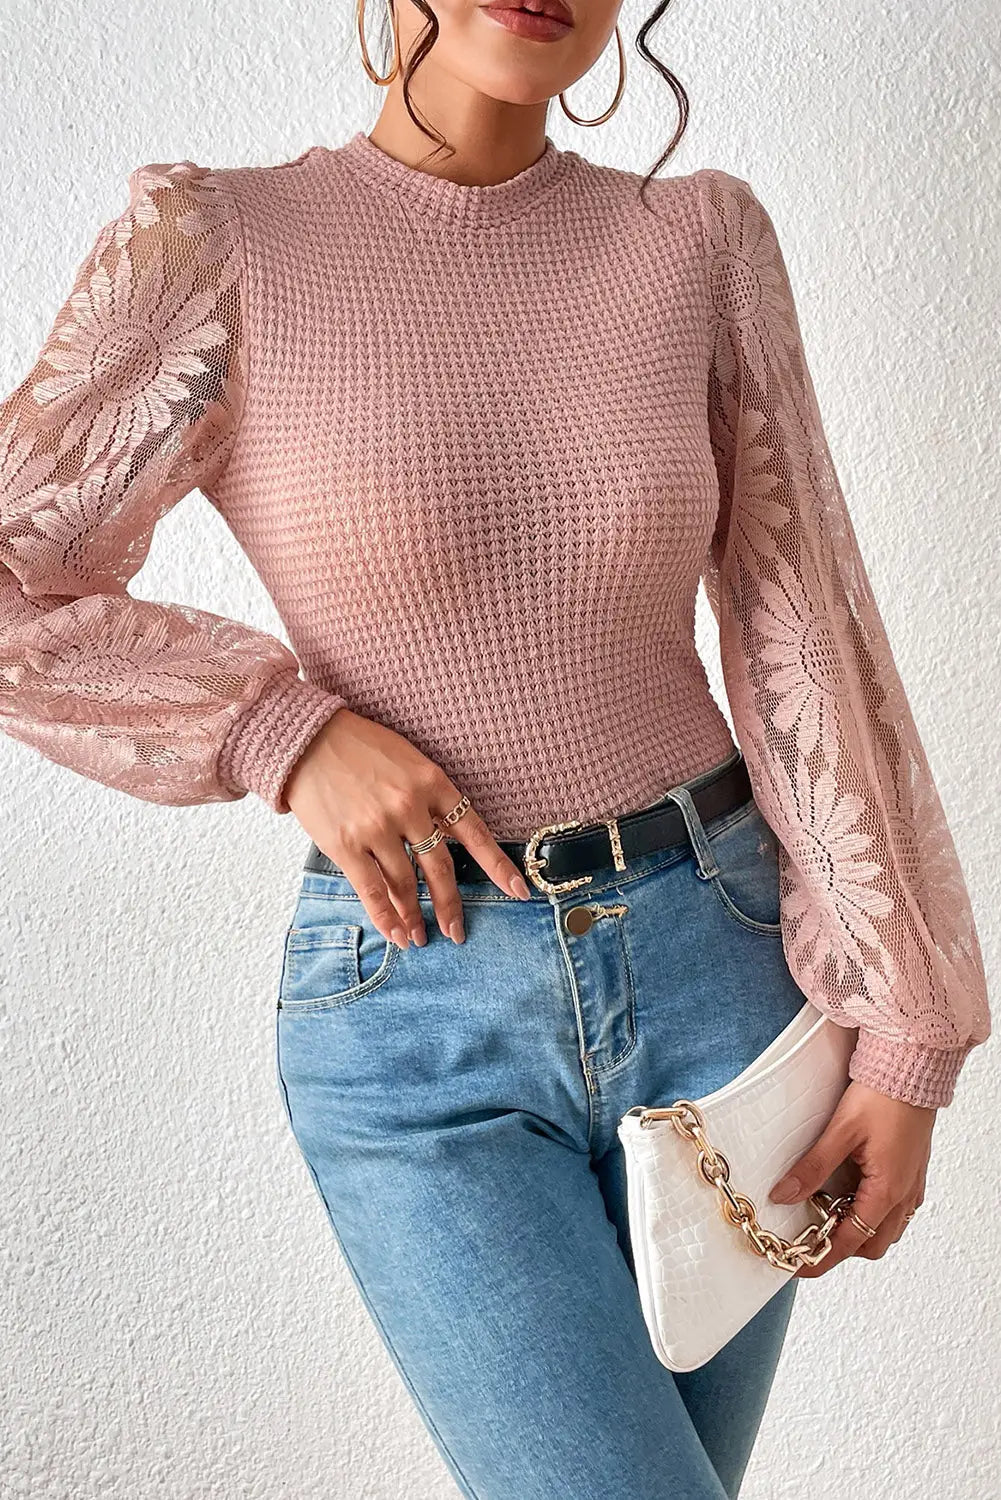 Peach blossom sunflower mesh bubble sleeve waffle knit top - long tops